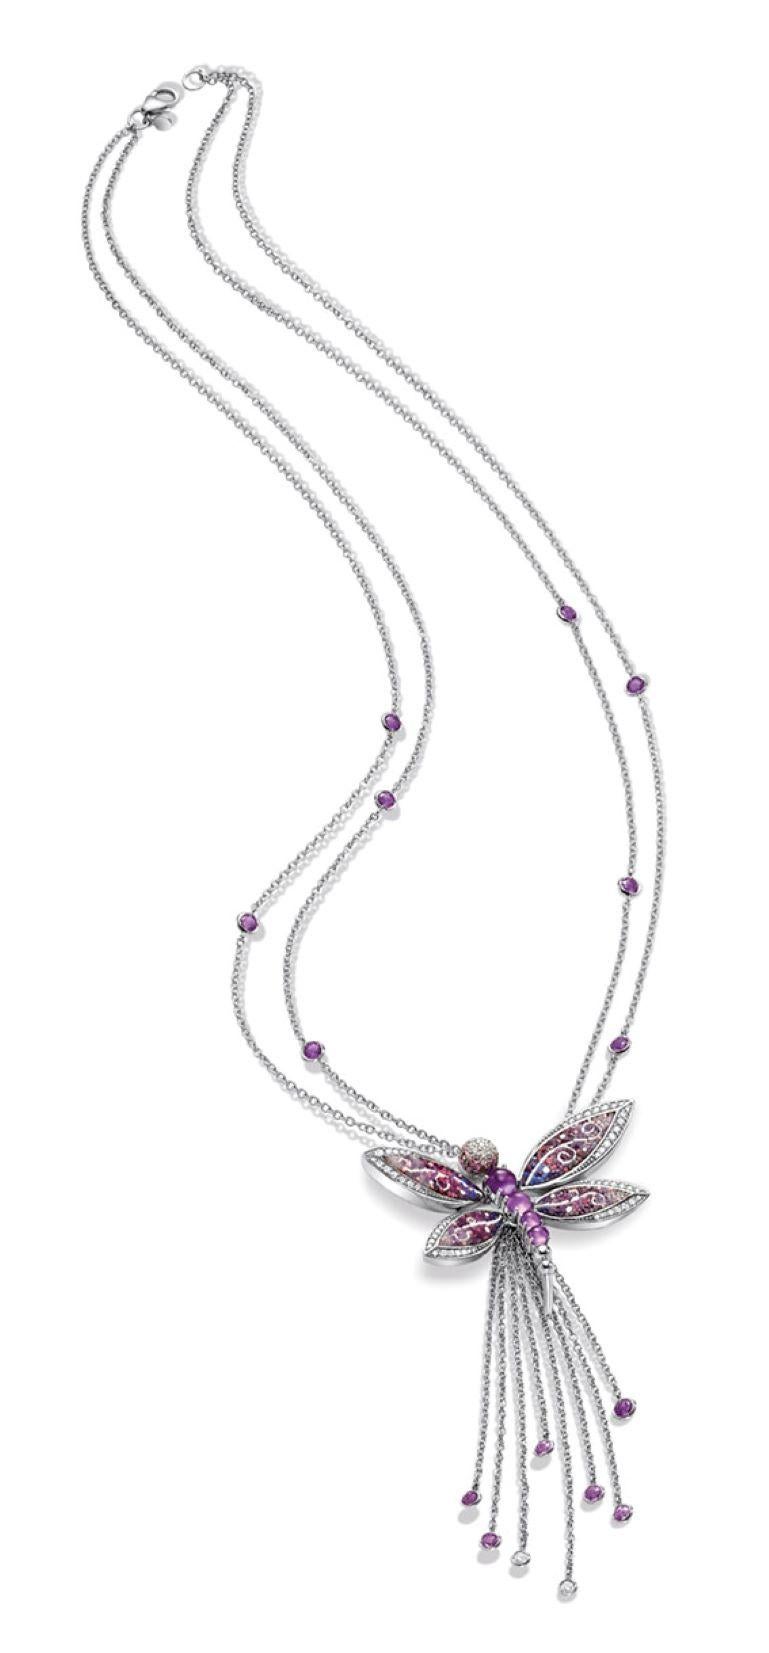 Romantic Necklace White Gold White Diamonds Sapphires Amethyst Hand Decorated MicroMosaic For Sale